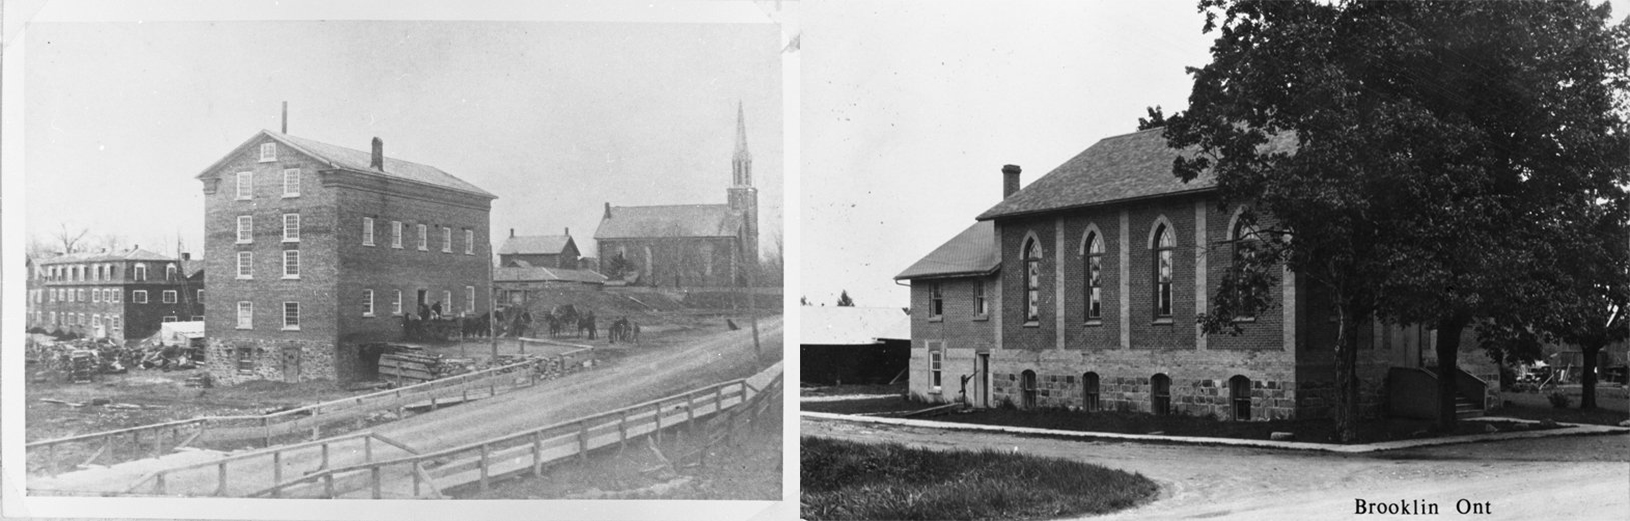 Left: Black and white historic image of the Brooklin Flour Mill, a 3 storey tall brick building with single gable roof. Right: Black and white historic image of the Brooklin Township Hall, a 2 storey brick building with a gable roof.